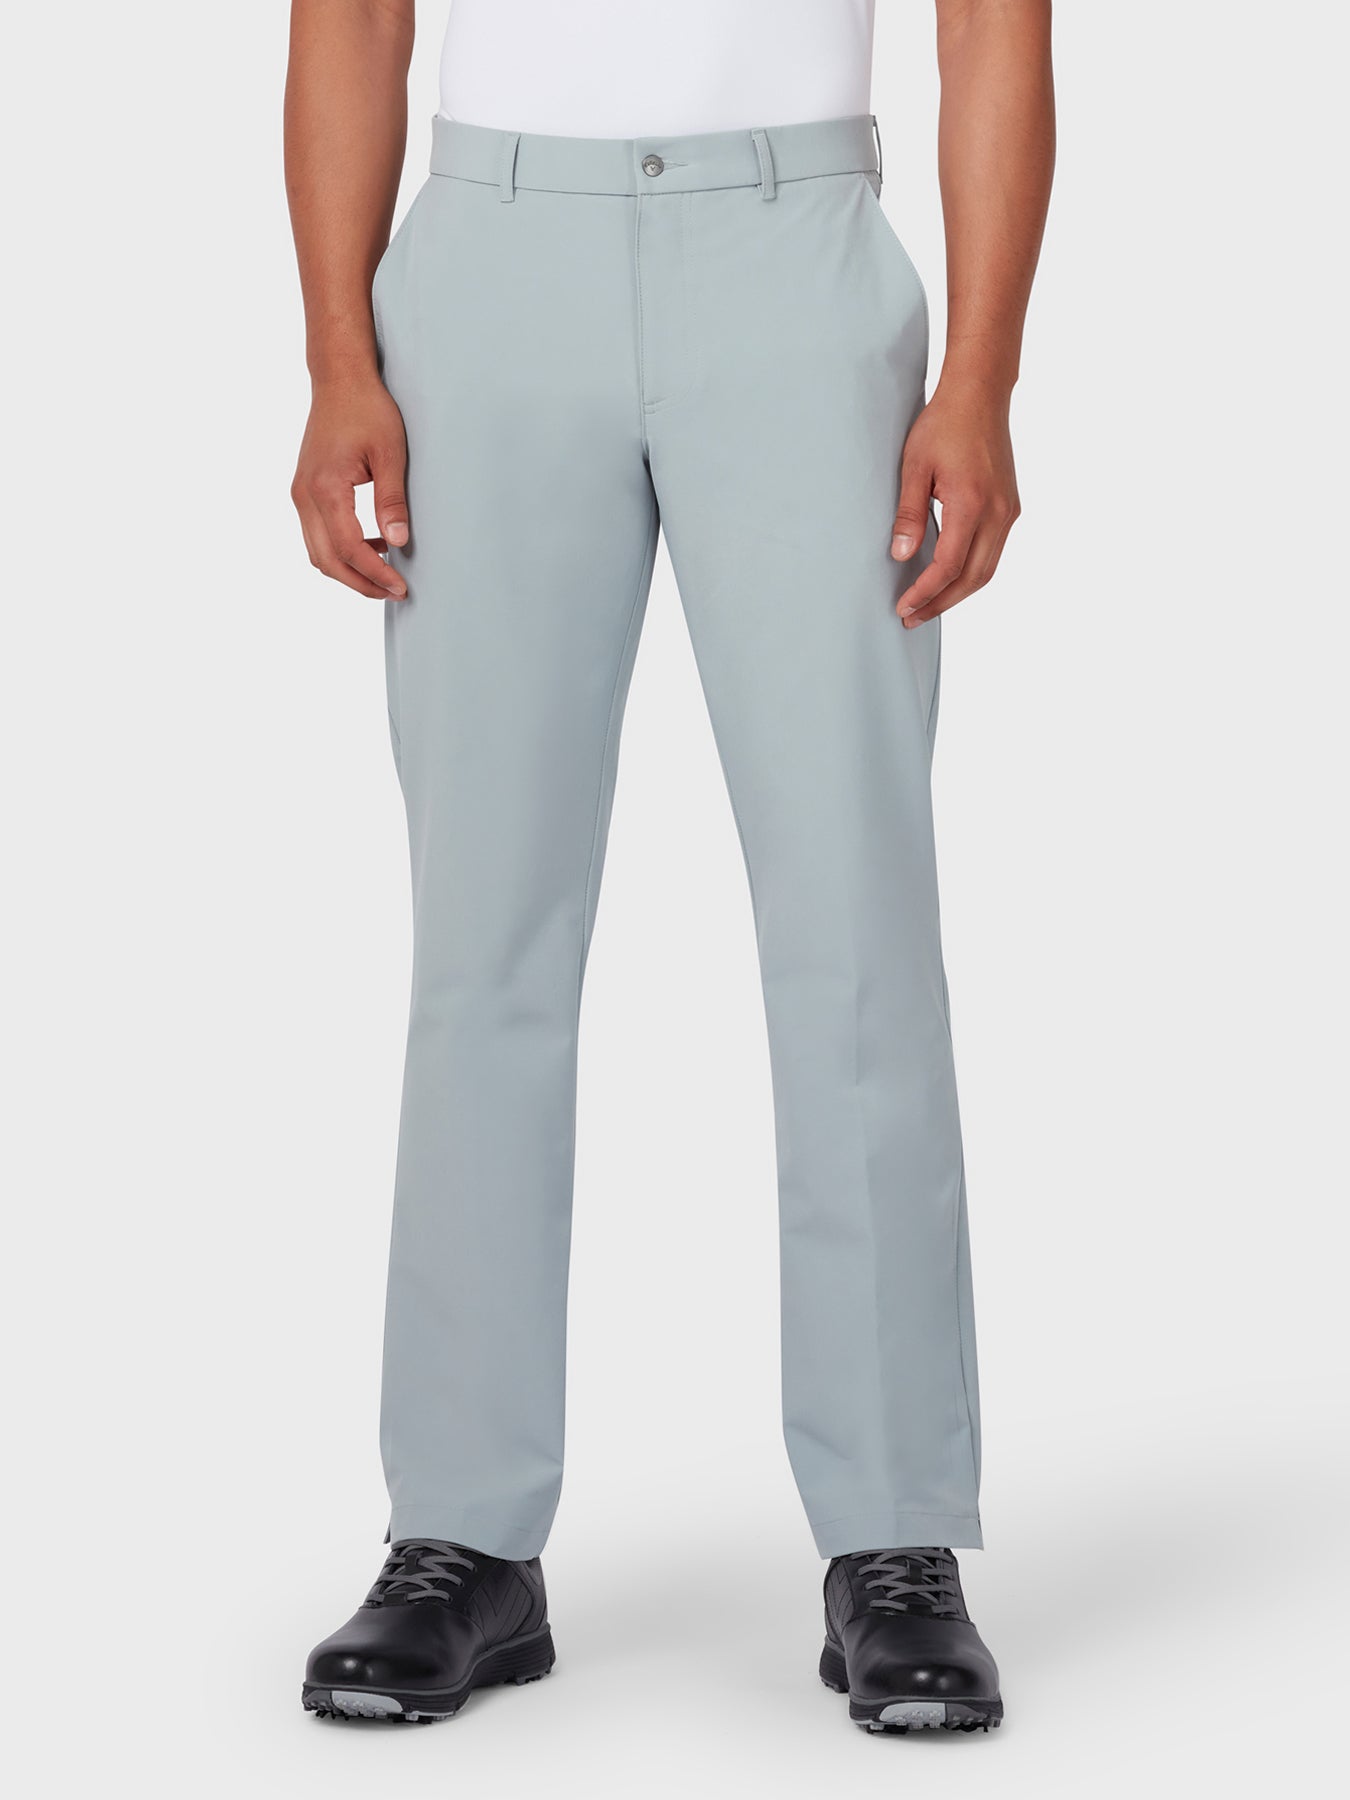 View Chevron Tech Trousers In Quarry information